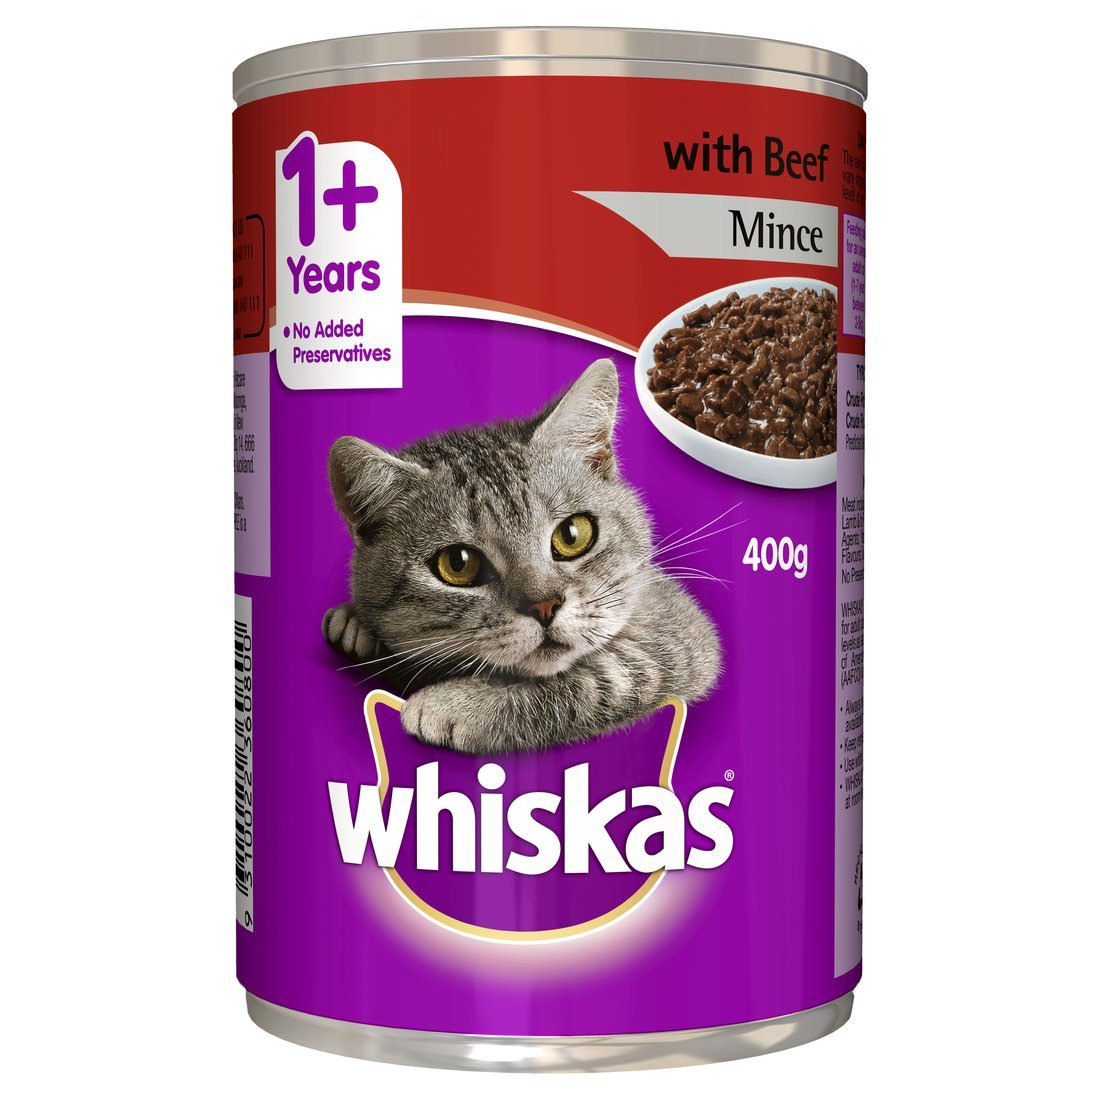 Whiskas 400g Mince With Beef - Woonona Petfood & Produce